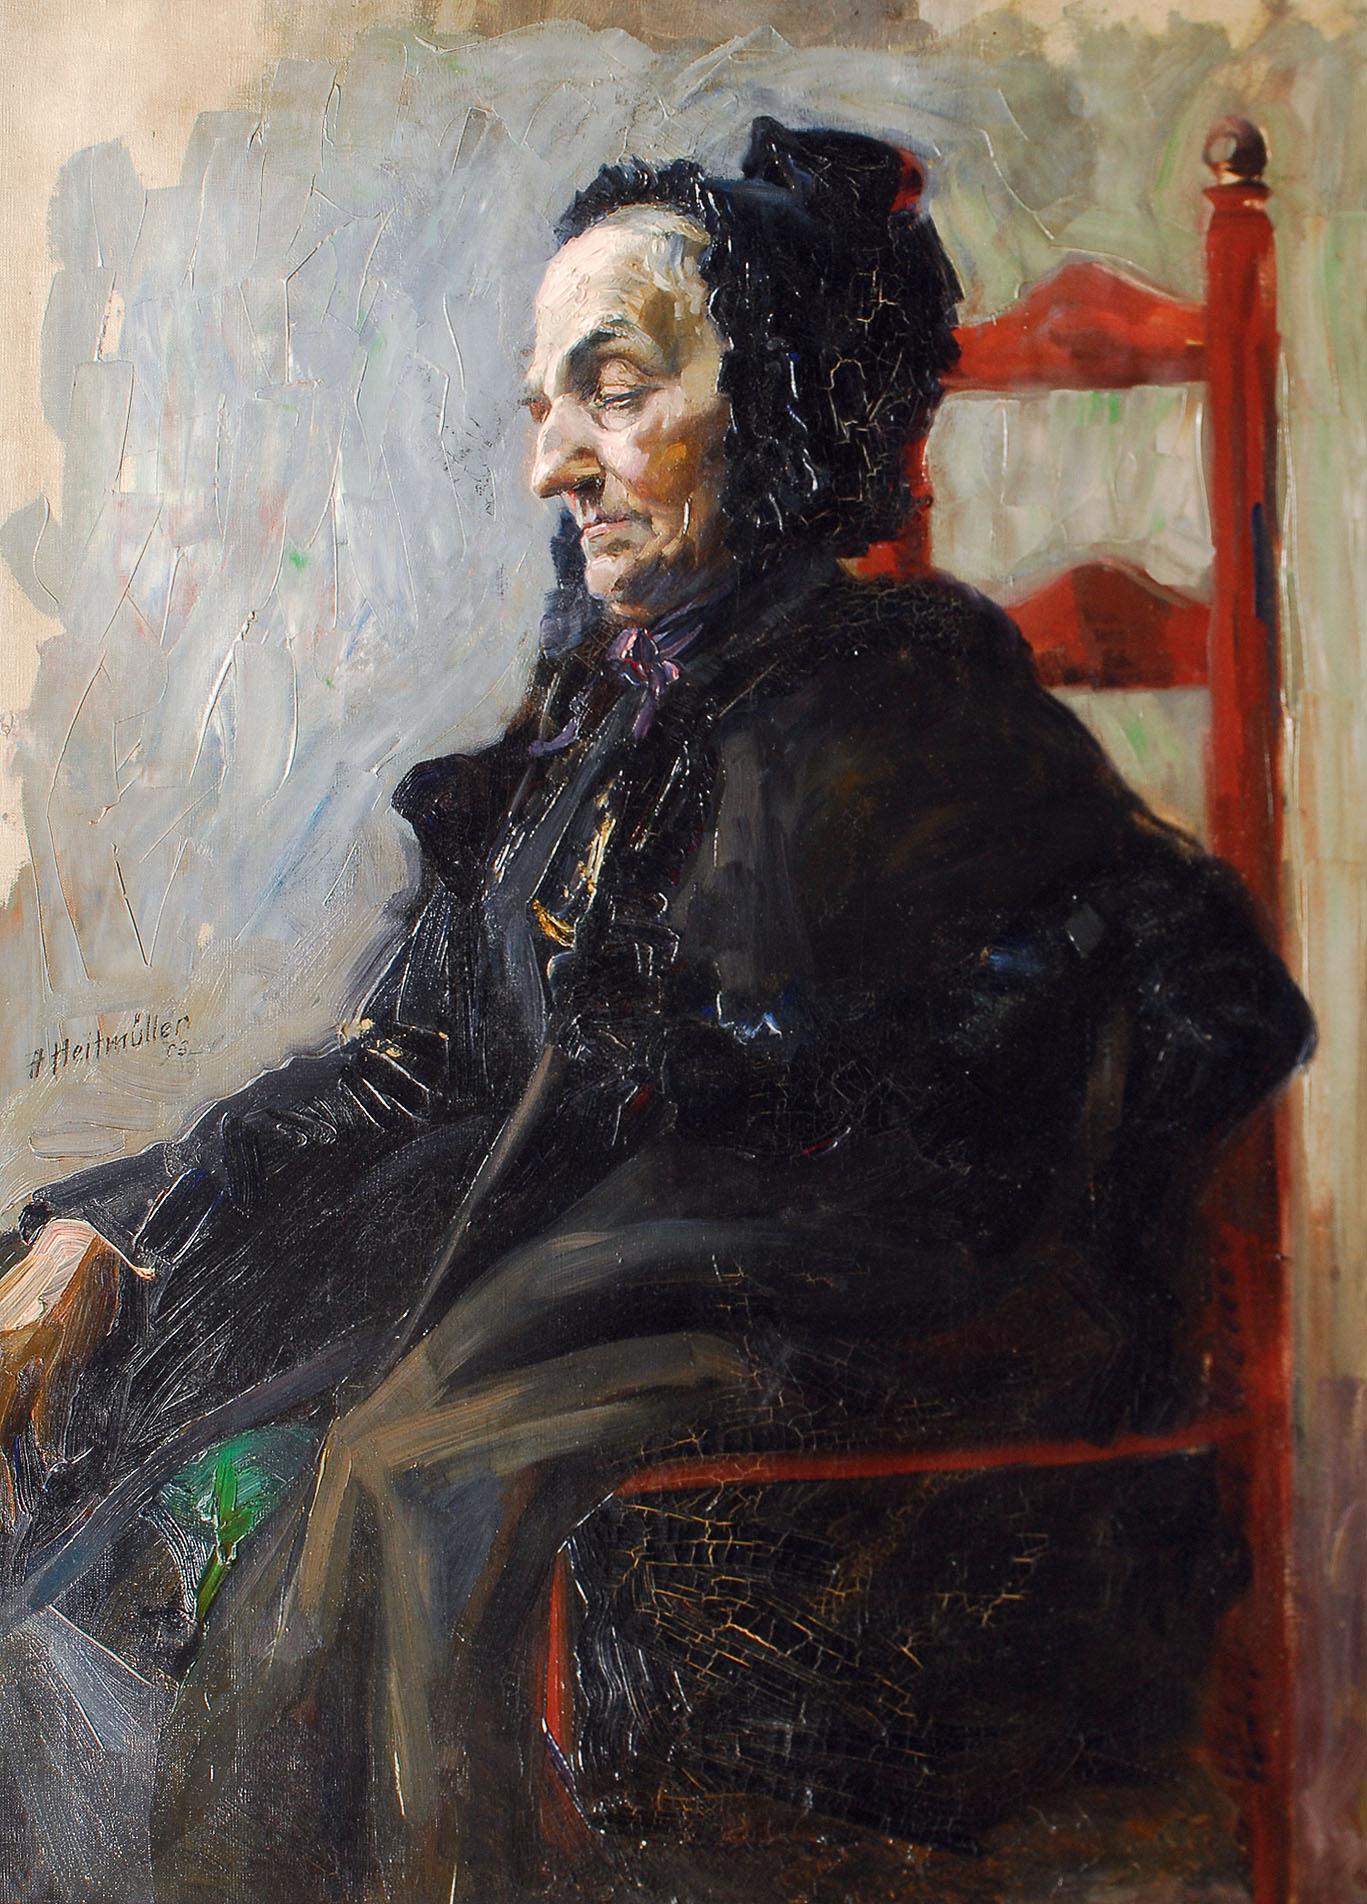 Woman sitting in a red chair